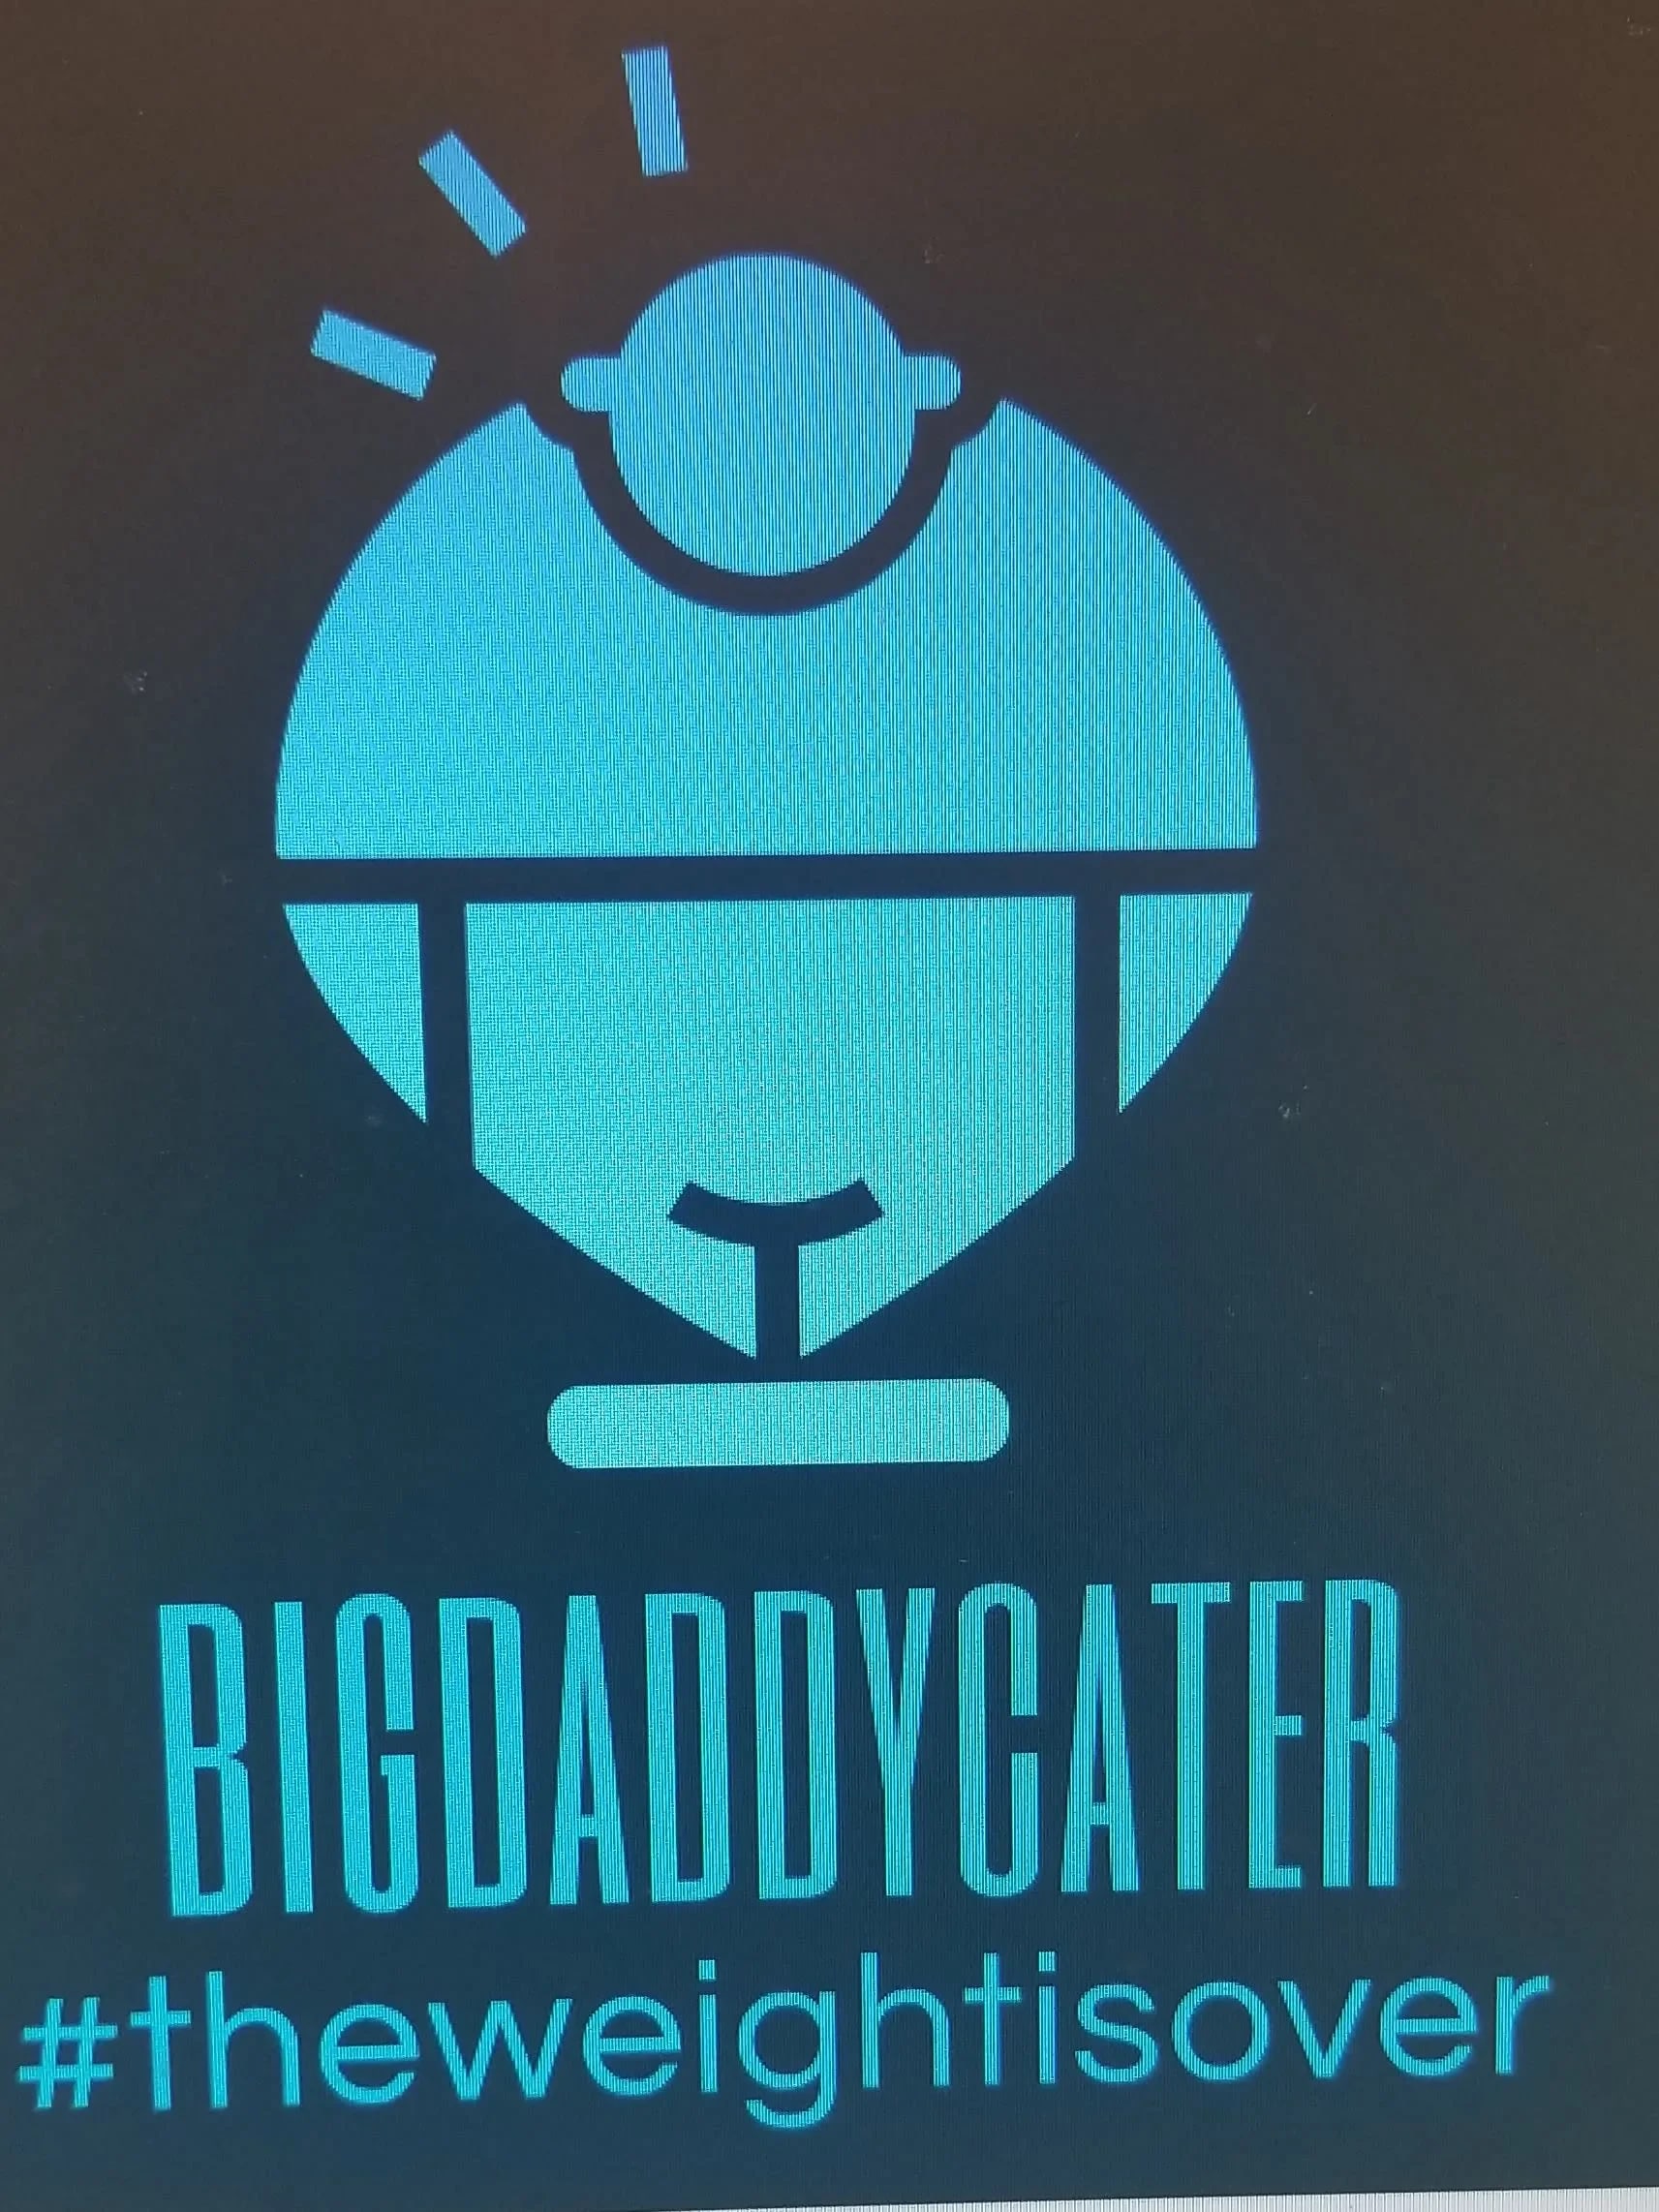 Big Daddy Cater Comedy